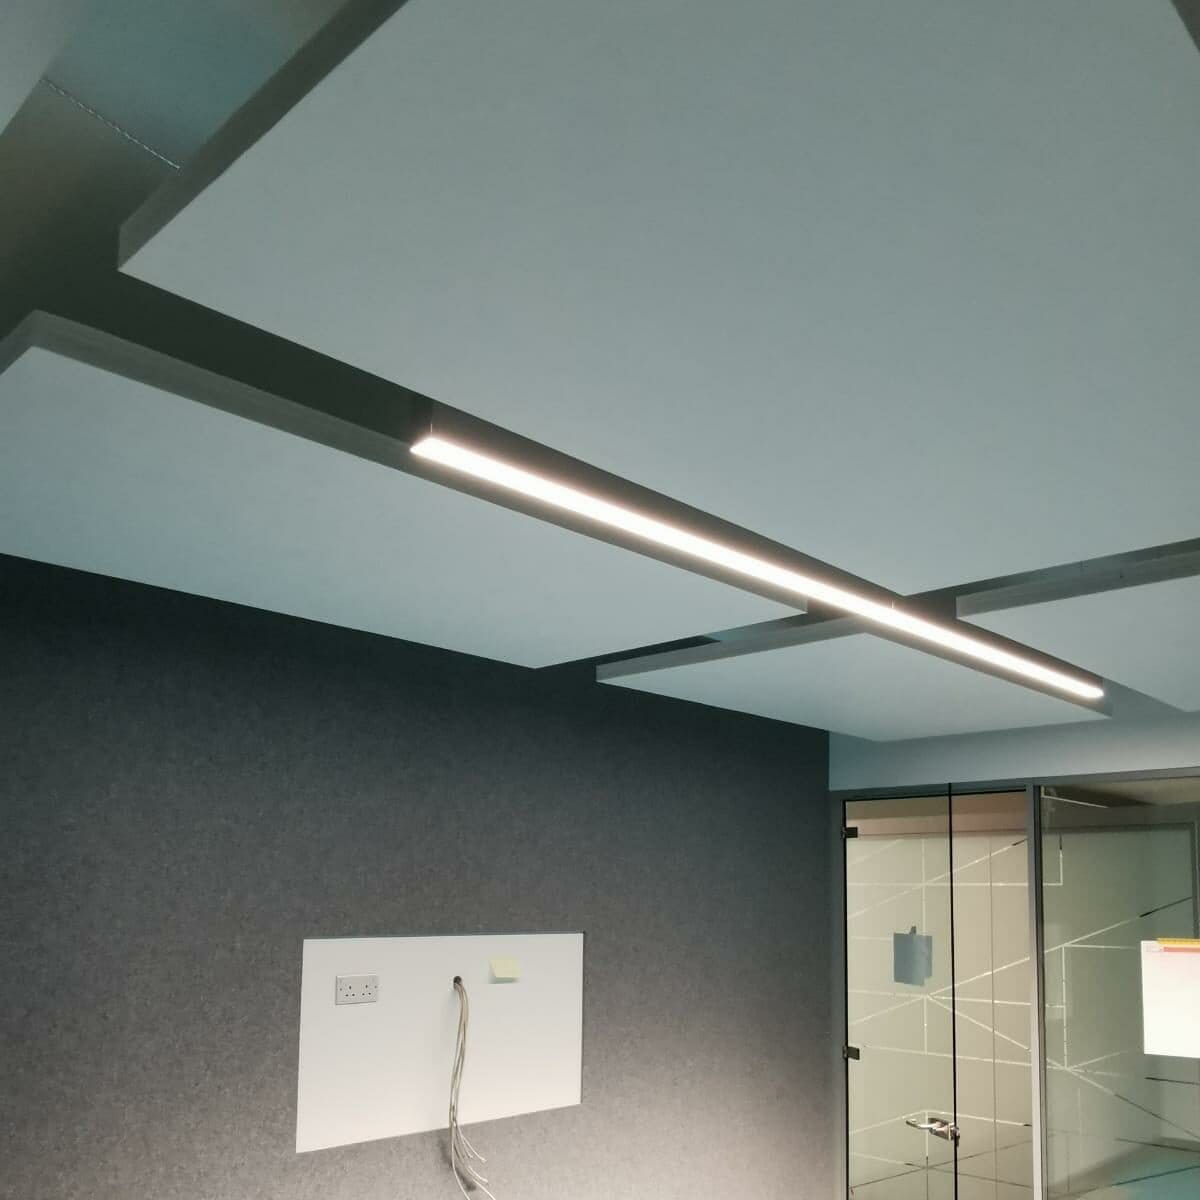 Vibe Glide sound absorbing ceiling tile